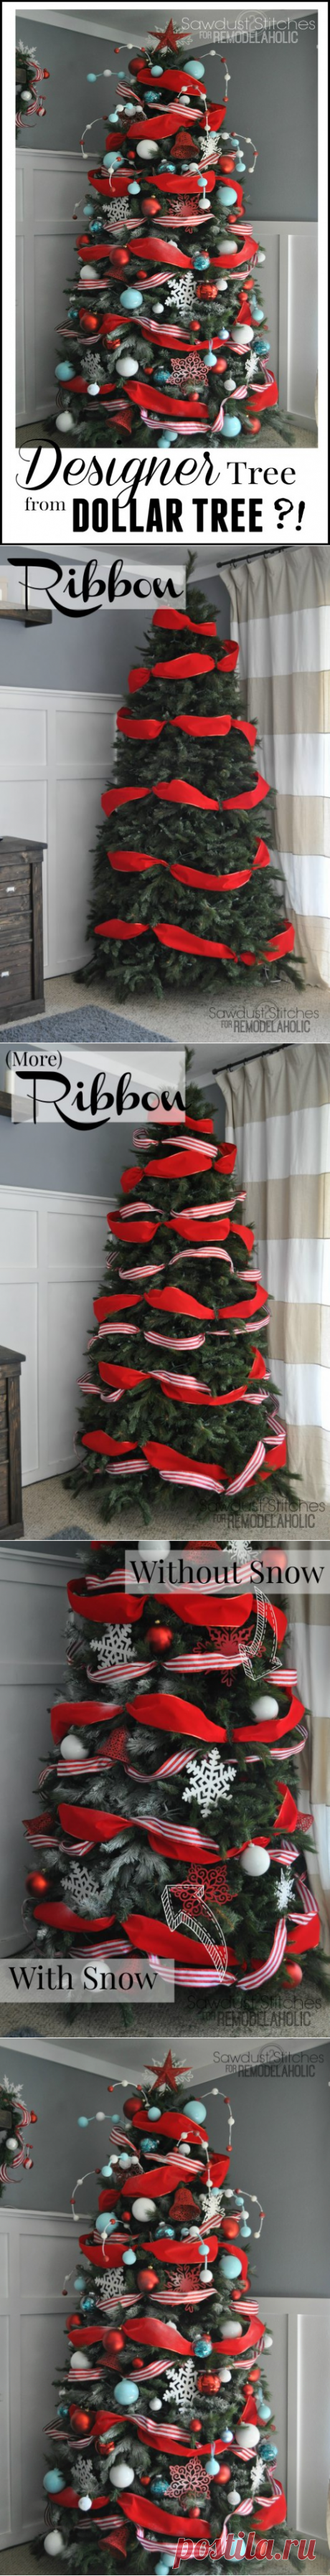 Remodelaholic | How to Decorate a Christmas Tree: A Designer Look from the Dollar Store